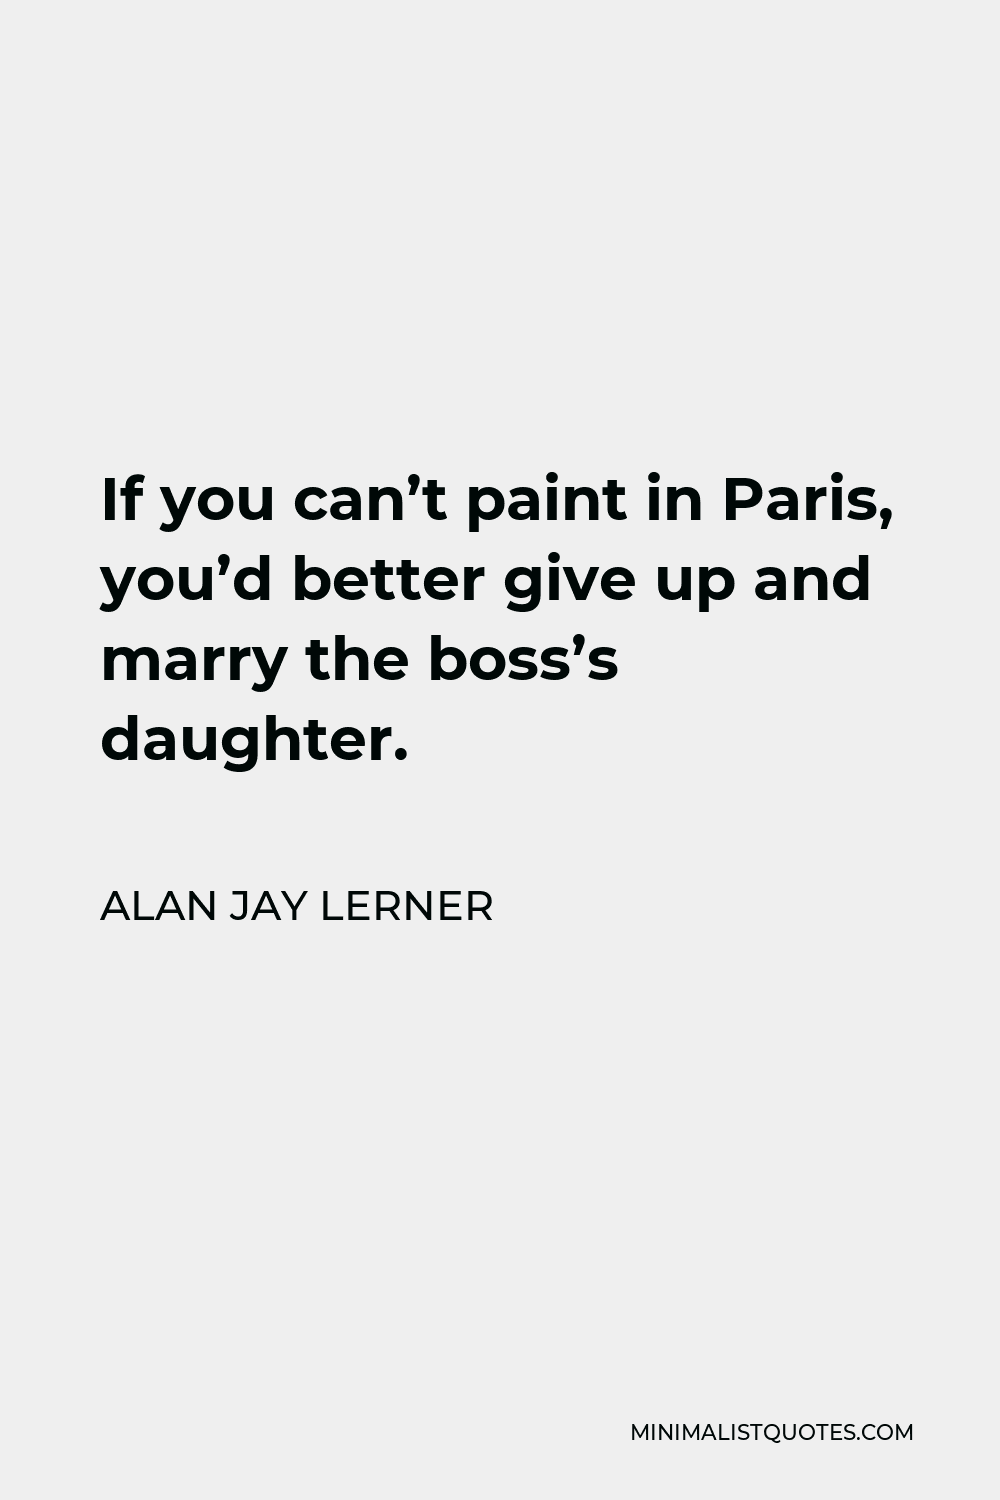 Alan Jay Lerner Quote - If you can’t paint in Paris, you’d better give up and marry the boss’s daughter.